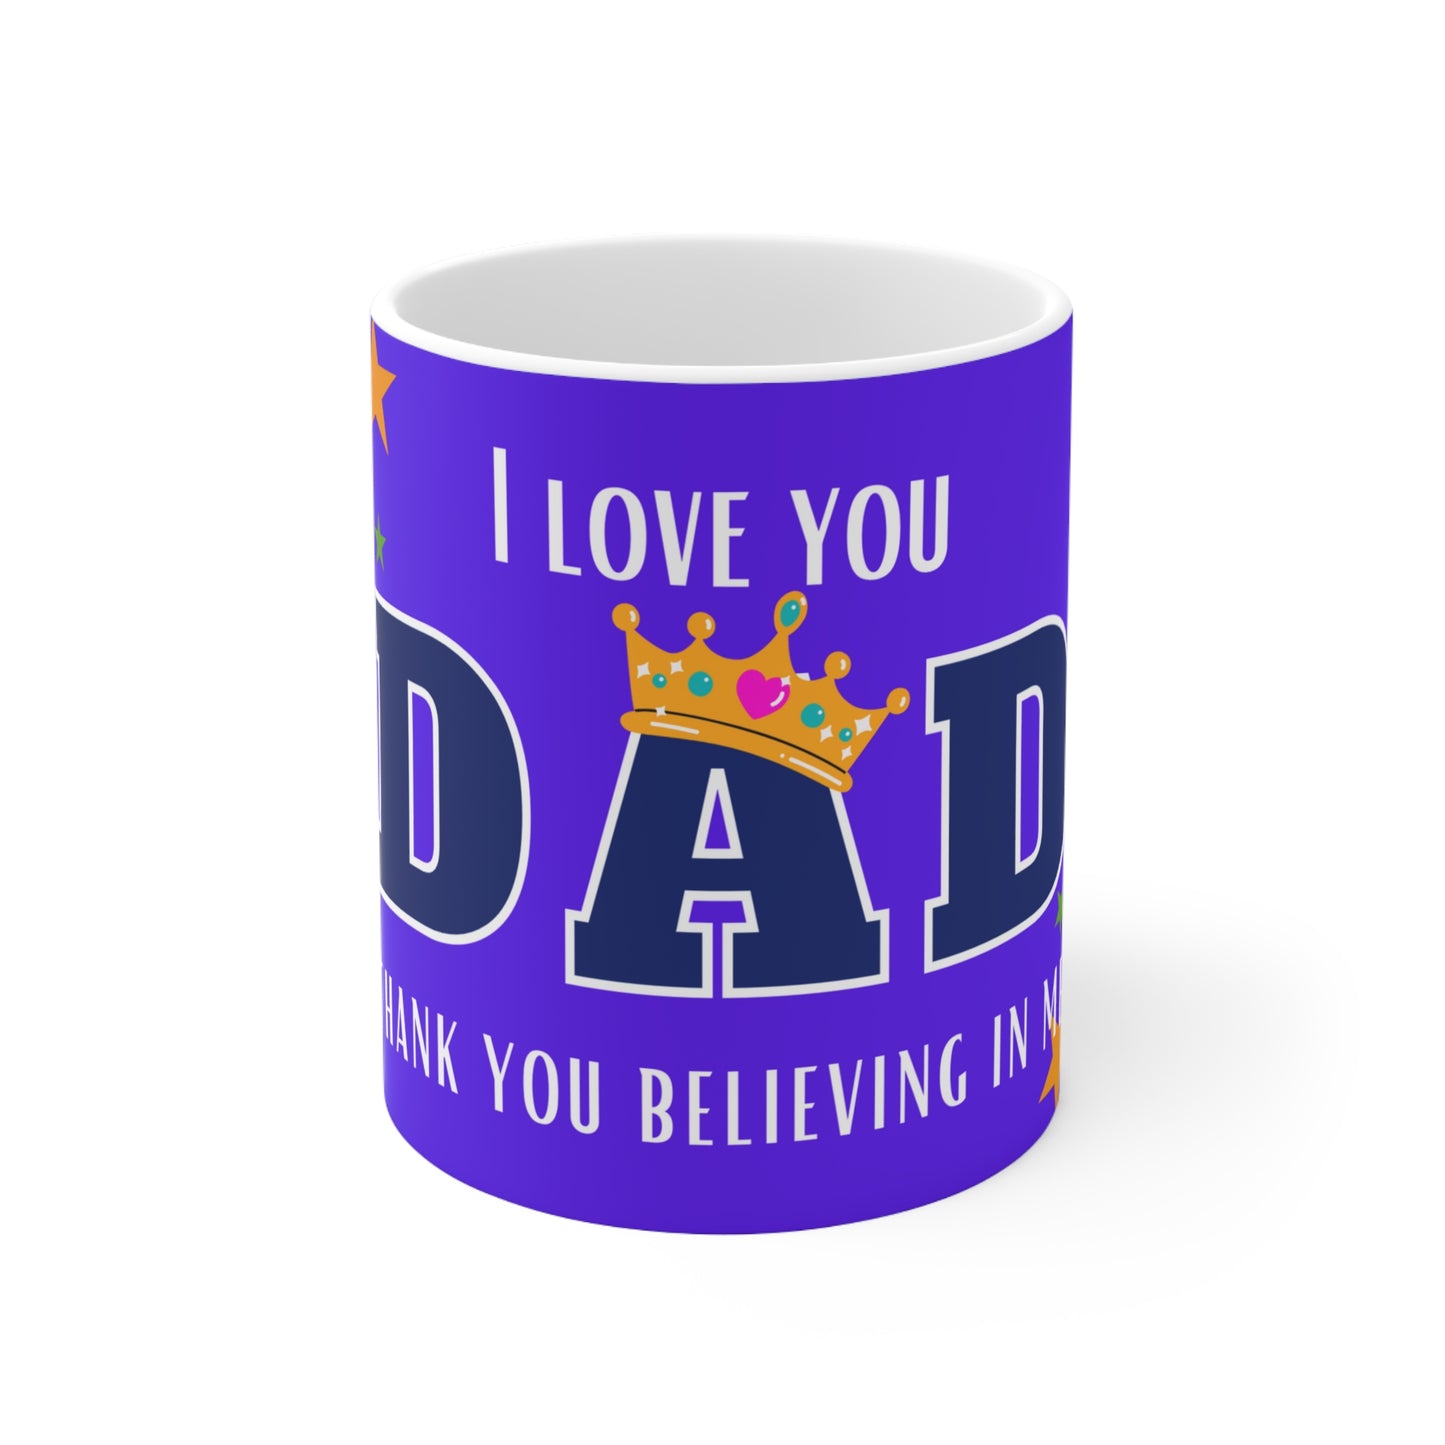 “I LOVE YOU DAD THANK YOU FOR BELIEVING IN ME!” coffee mug for that special dad. A great gift indeed.